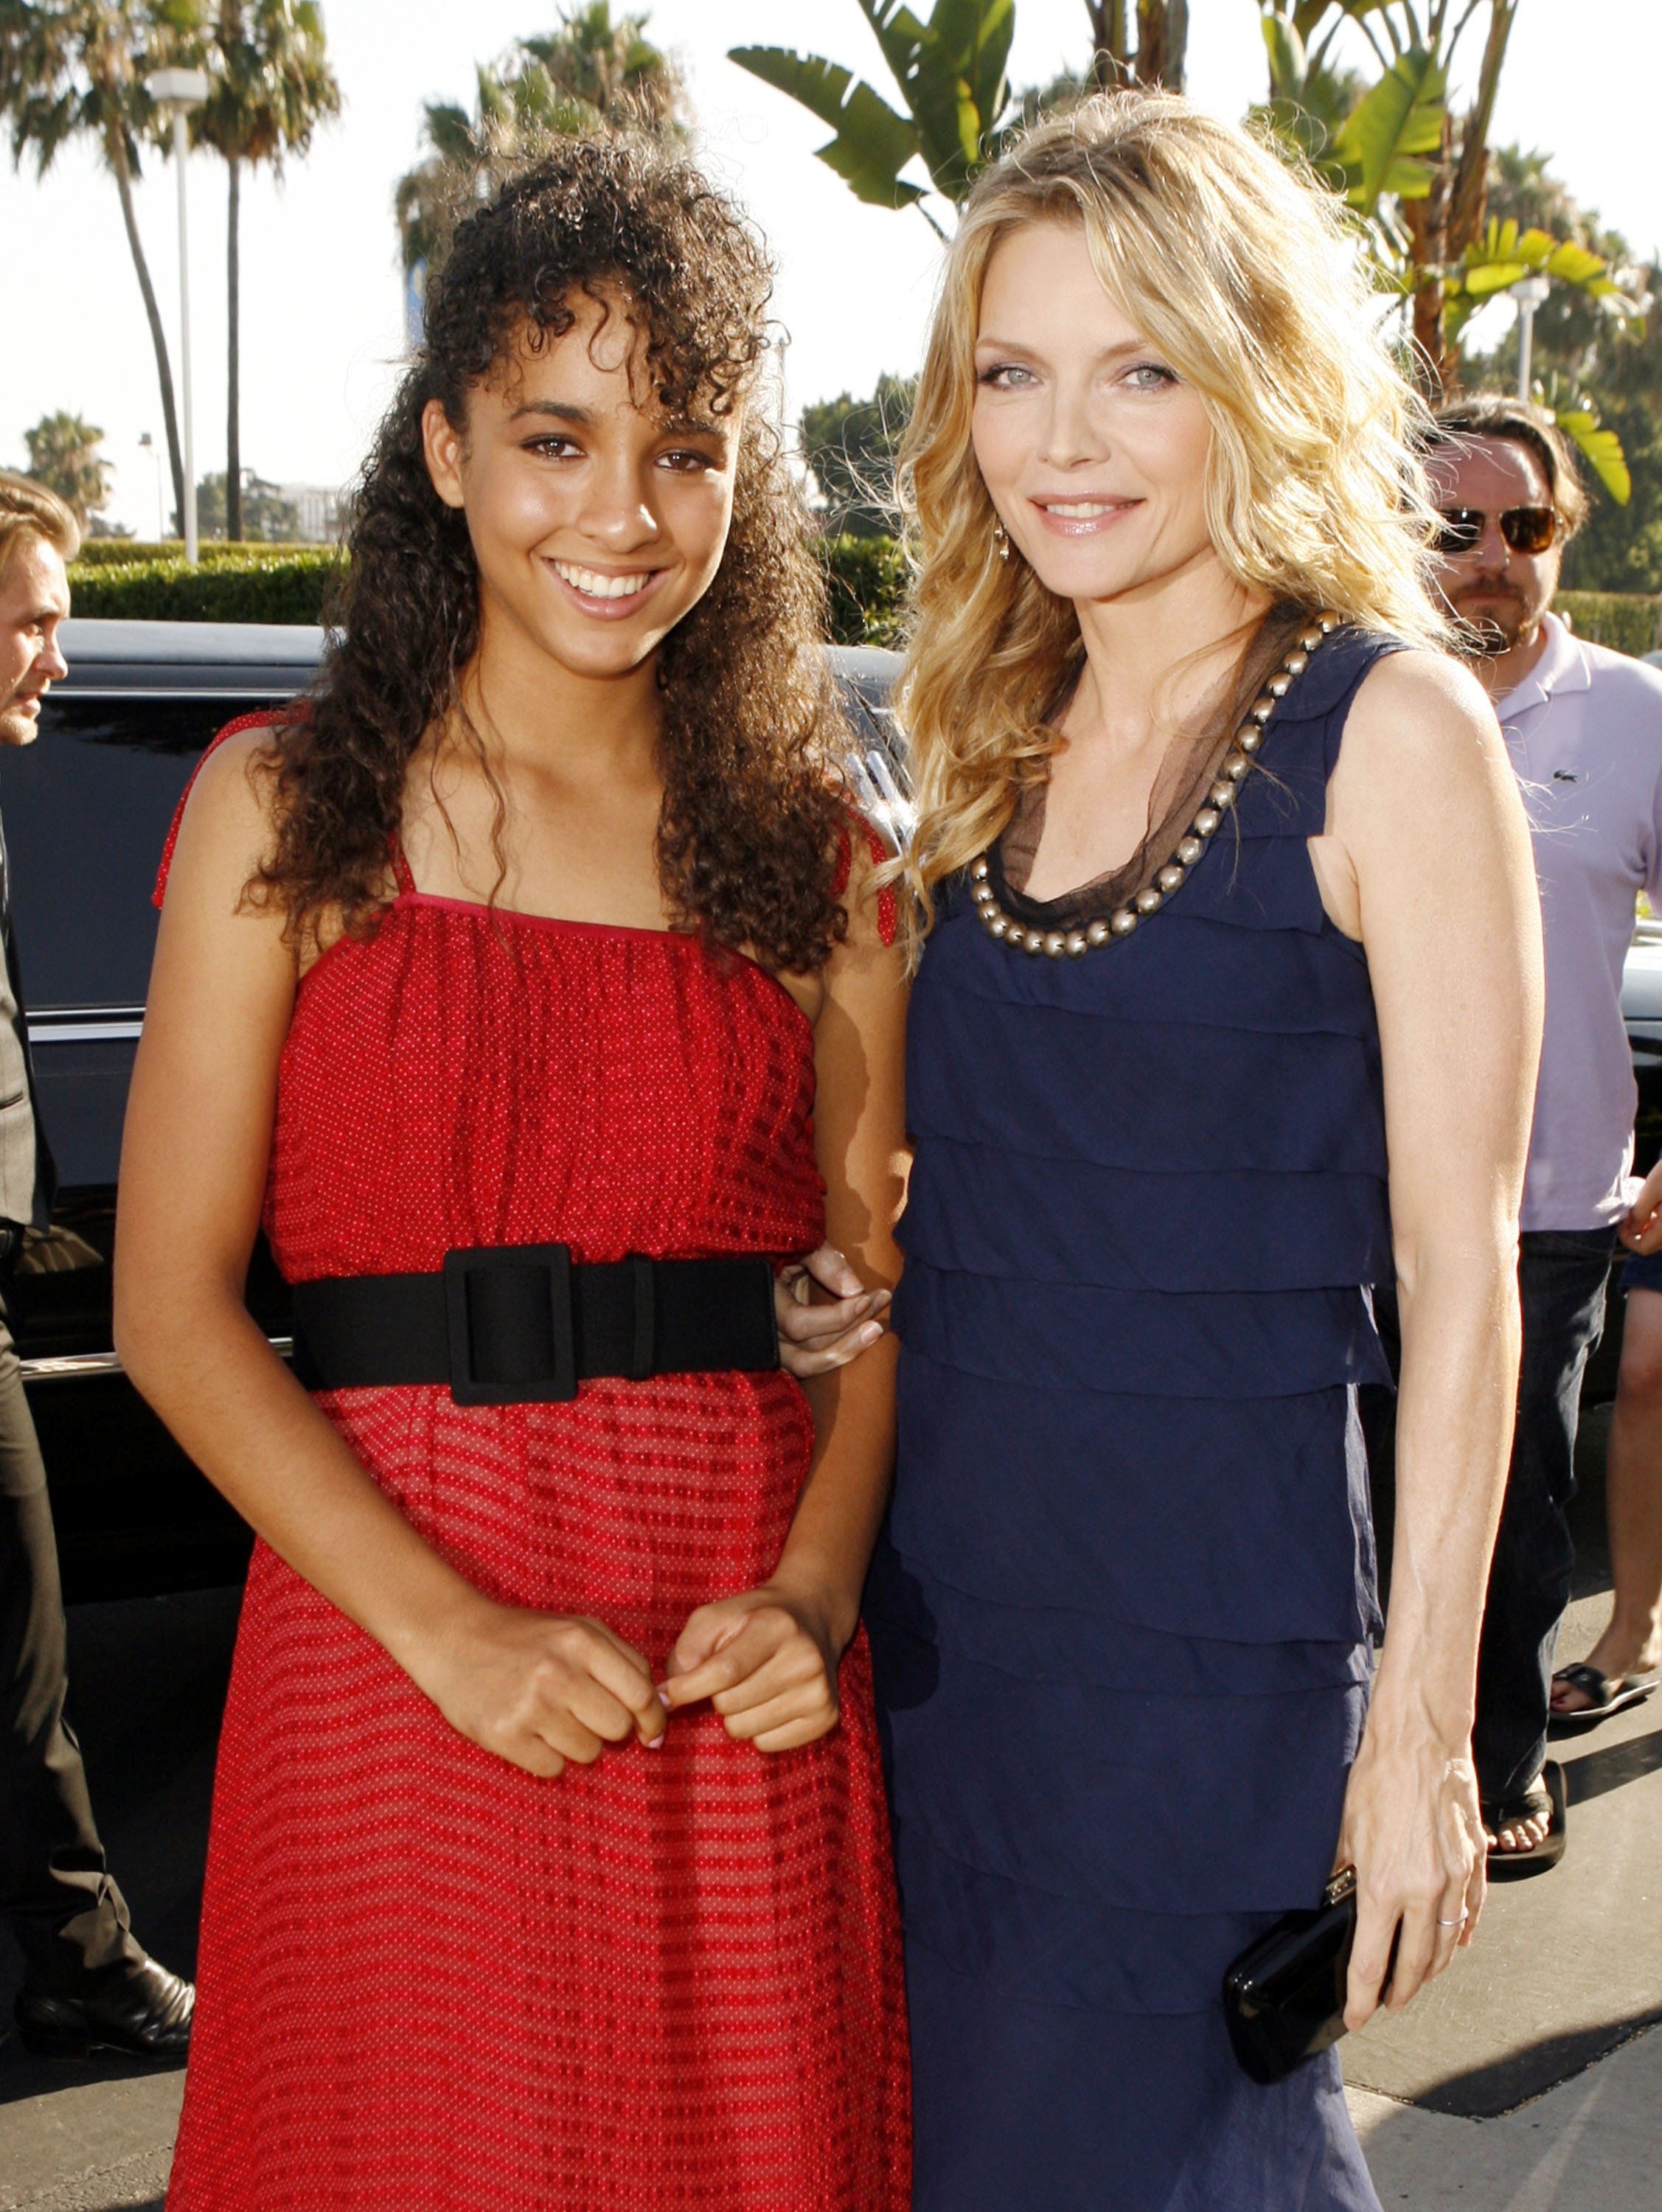 Actress Michelle Pfeiffer (R) and her daughter Claudia arrive at the premiere of Paramount Picture's "Stardust" at the Paramount Studio Theater on July 29, 2007 in Los Angeles, California | Source: Getty Images